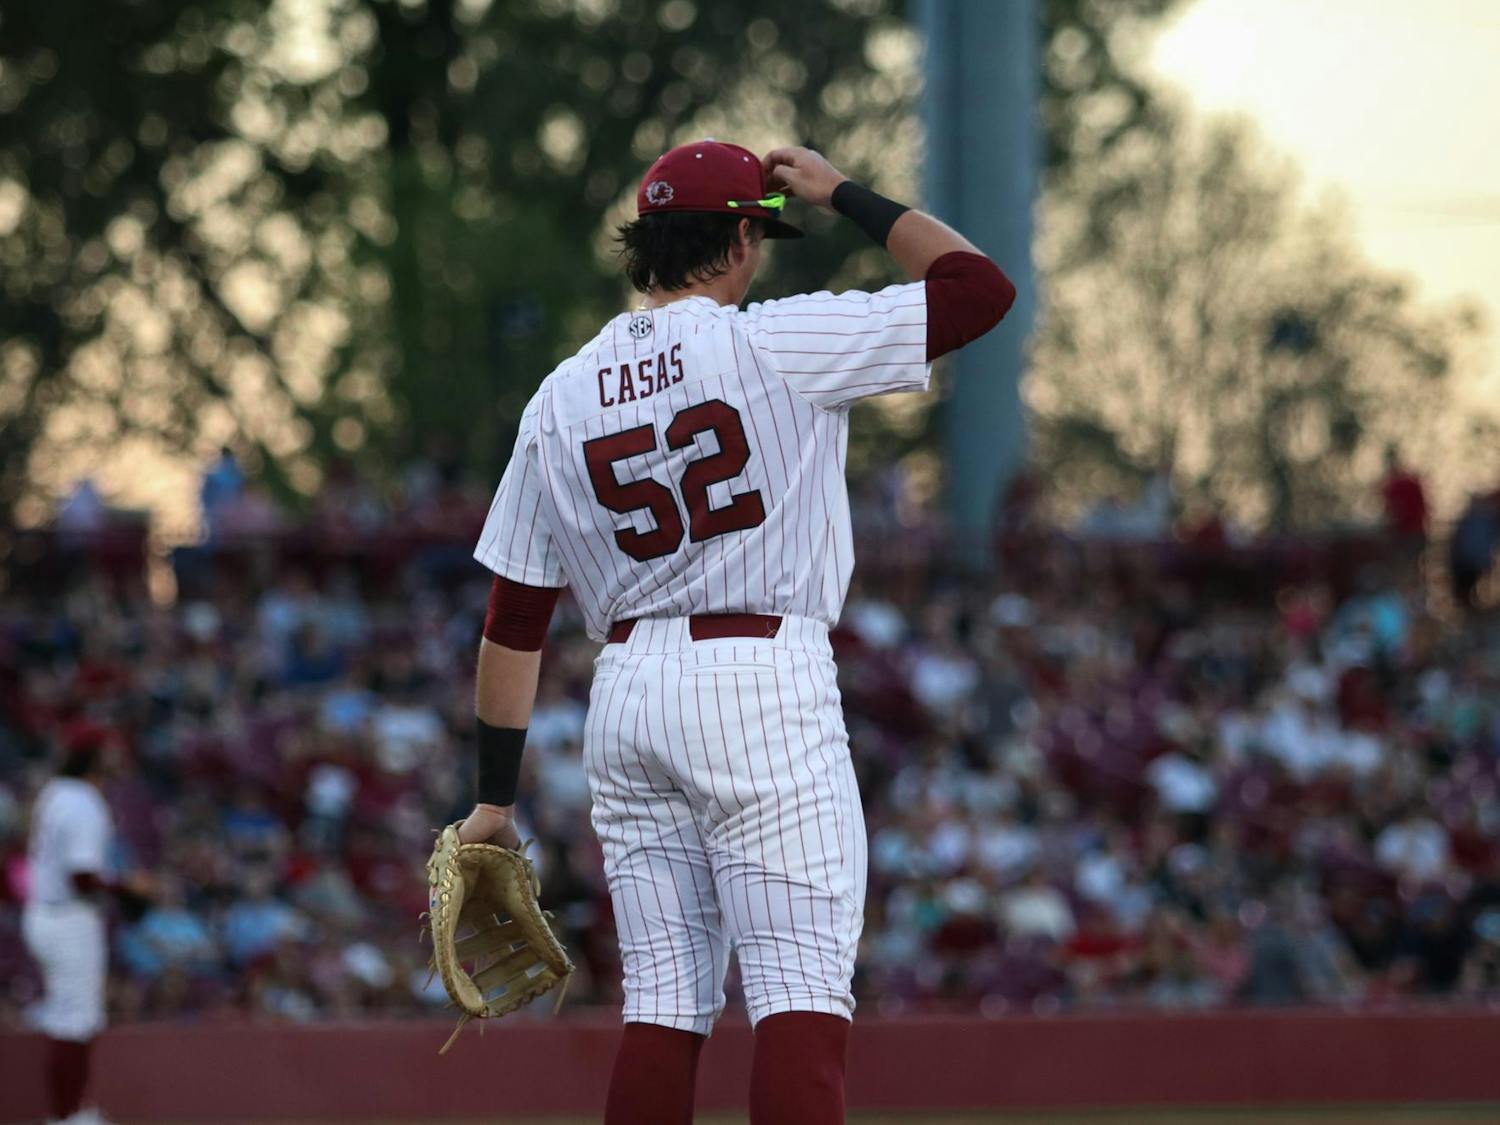 Senior infielder Gavin Casas adjusts his hat during the 9-8 Gamecock victory over the Missouri Tigers at Founders Park on March 24, 2023. Casas decided to return to Gamecock baseball for his senior season, foregoing the MLB draft.